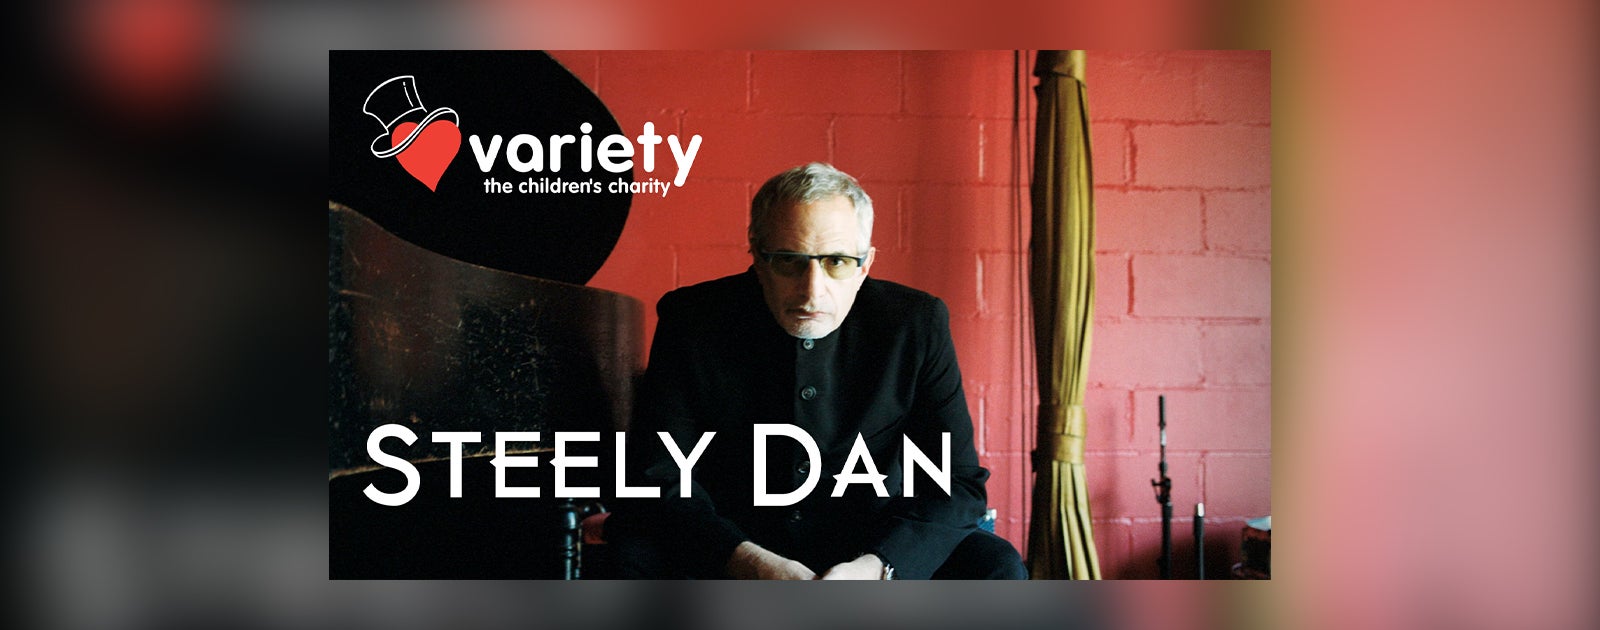 Variety Children's Charity featuring Steely Dan - CANCELED